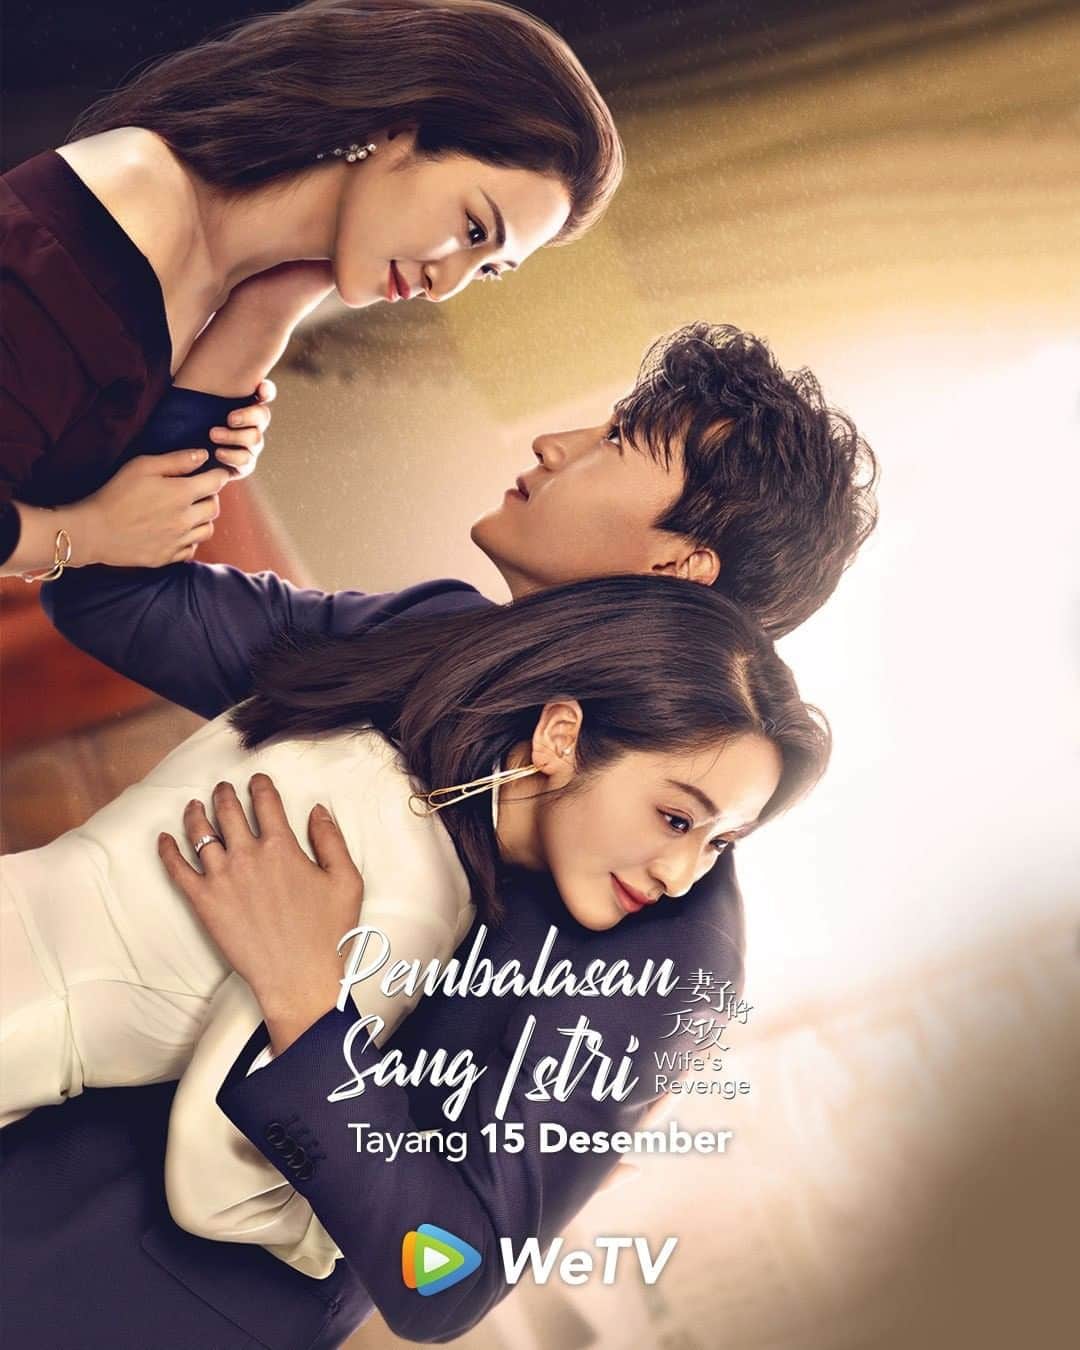 Wife's Revenge - Sinopsis, Pemain, OST, Episode, Review